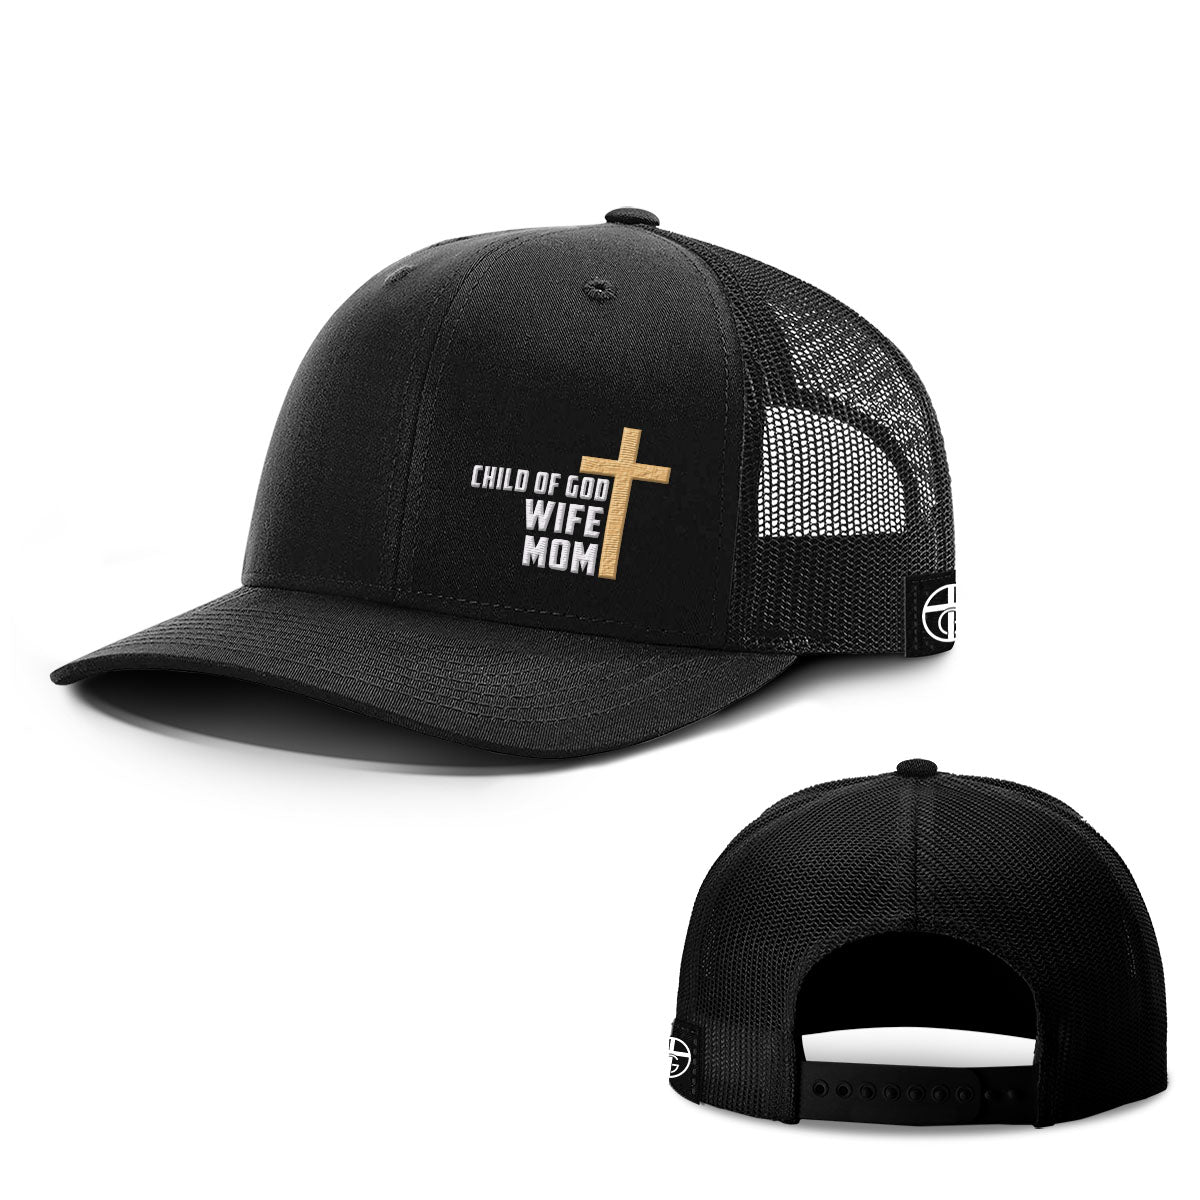 Child Of God, Wife, Mom Hats